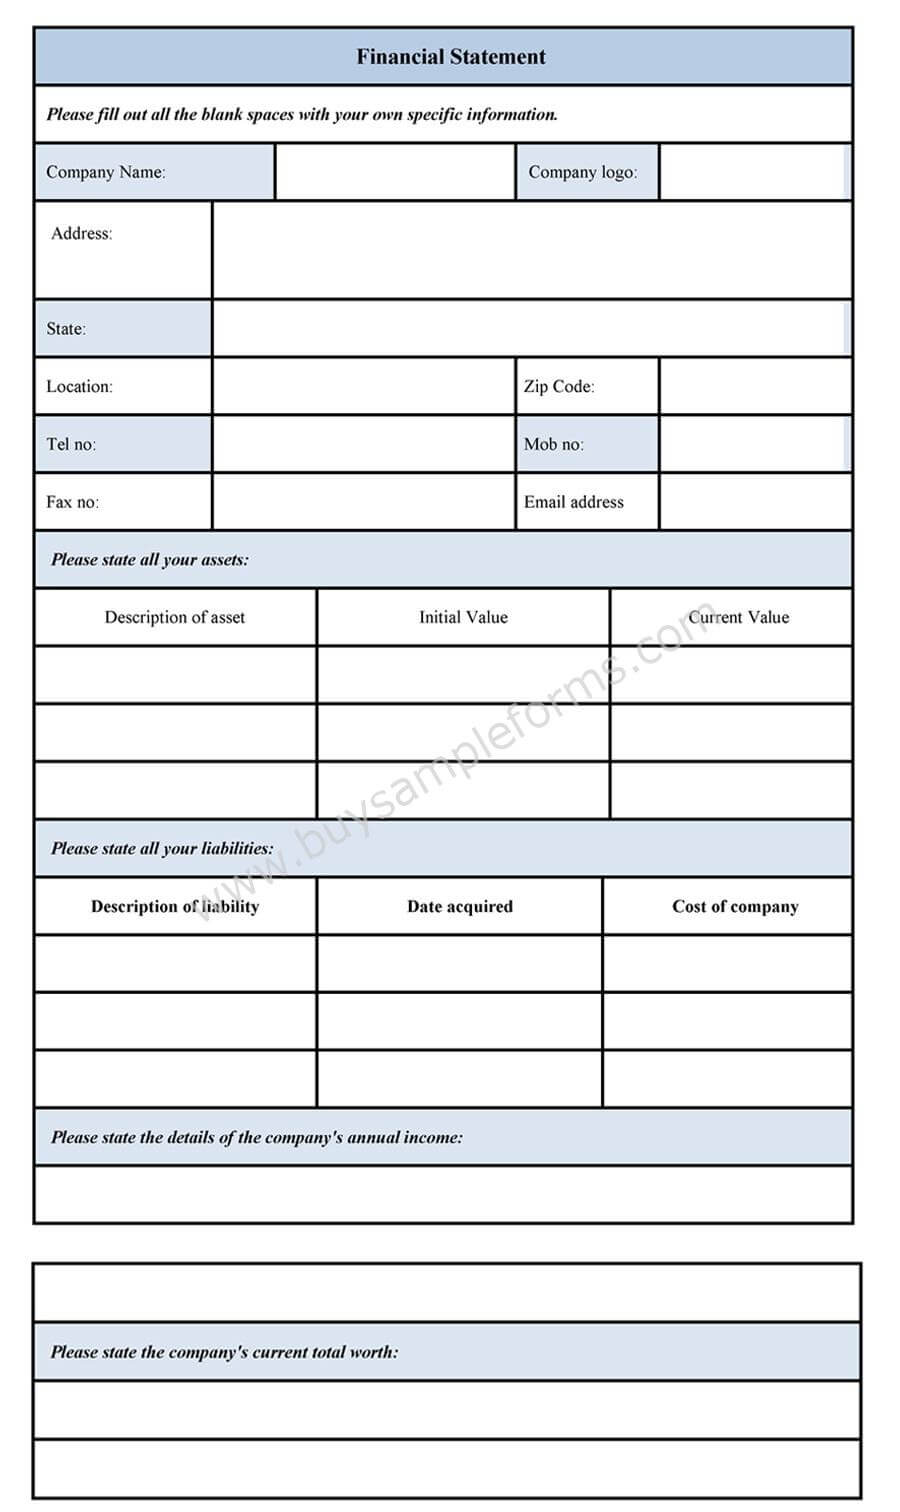 Basic Financial Statement Template. Statement Of Activities With Blank Personal Financial Statement Template